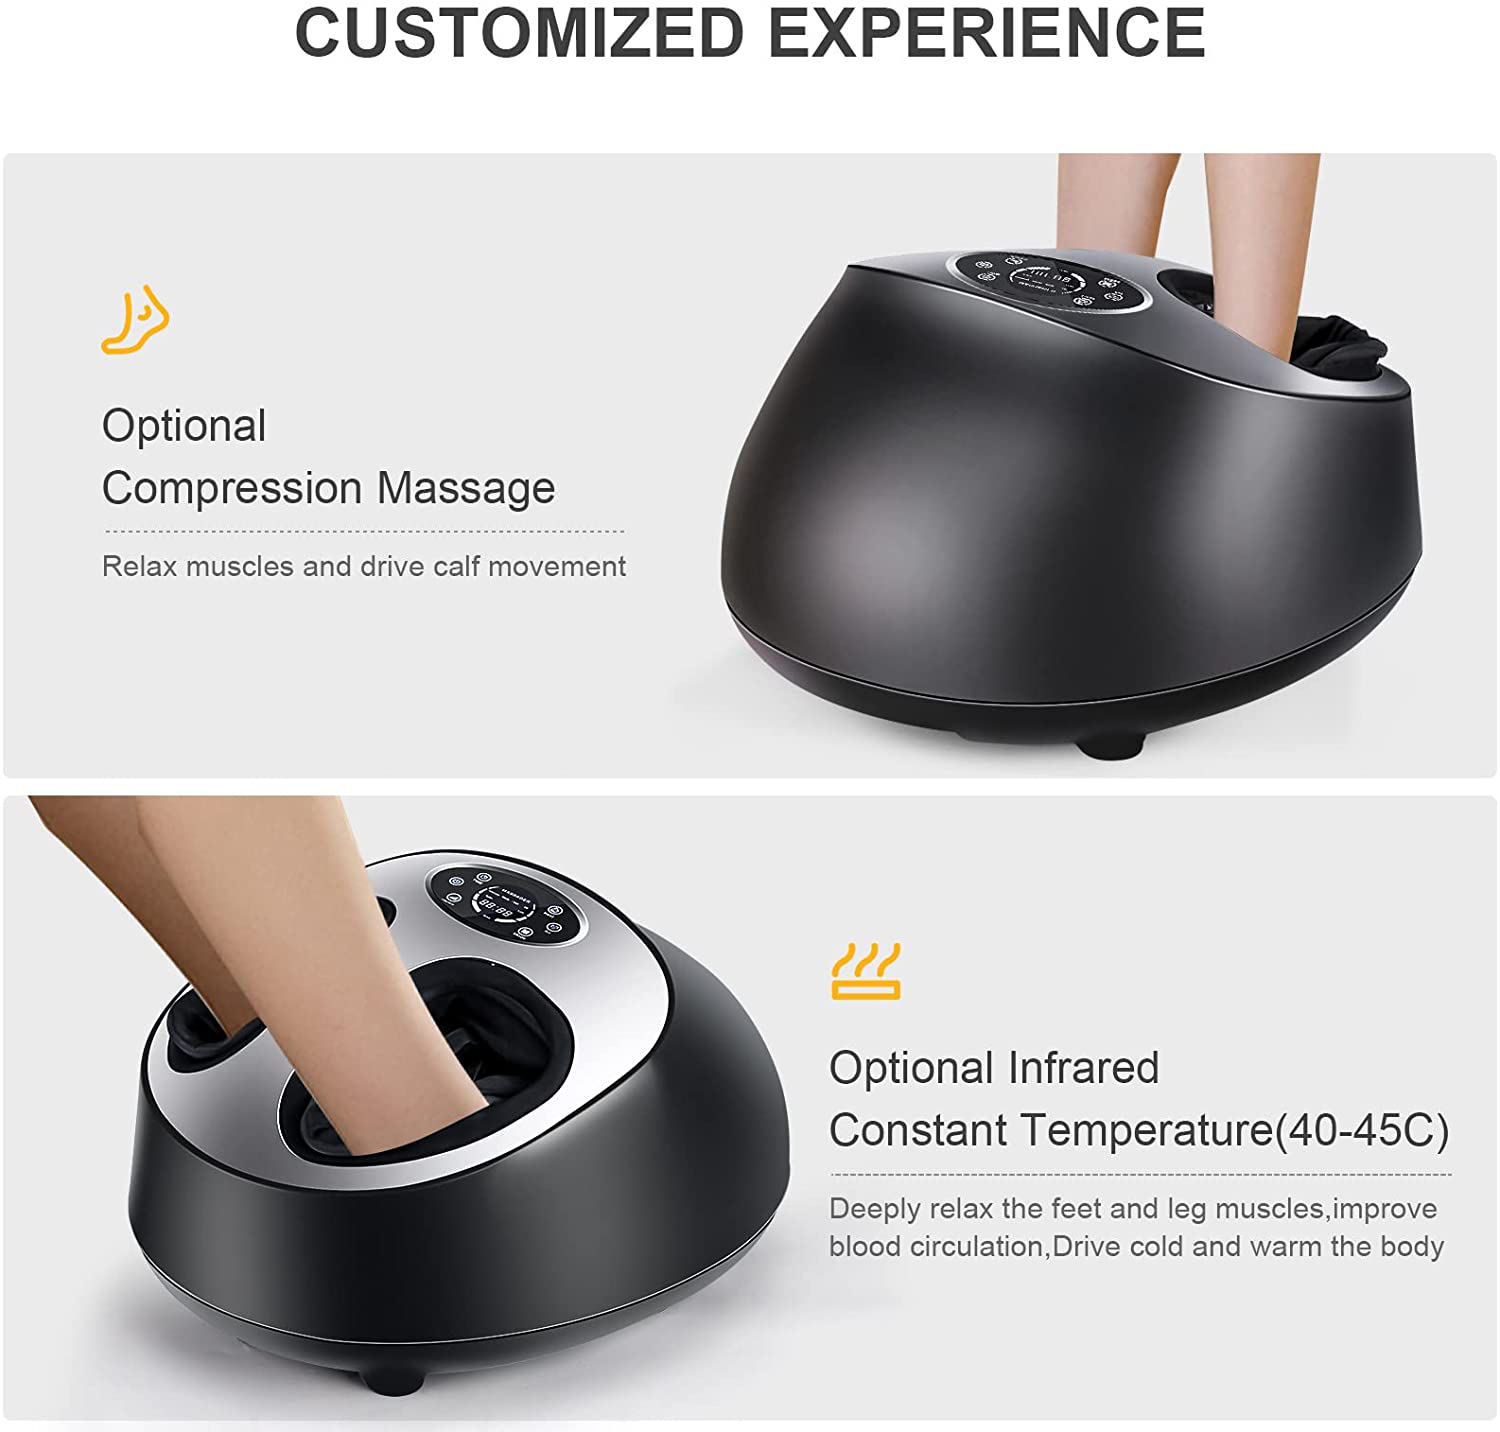 Christmas Gifts Foot Massager Machine with Heat for Plantar Fasciitis and Foot Pain Relief, Shiatsu Slabway Feet Massager for Neuropathy Pain and Circulation, Best Gifts for Mom/Dad/Women/Men